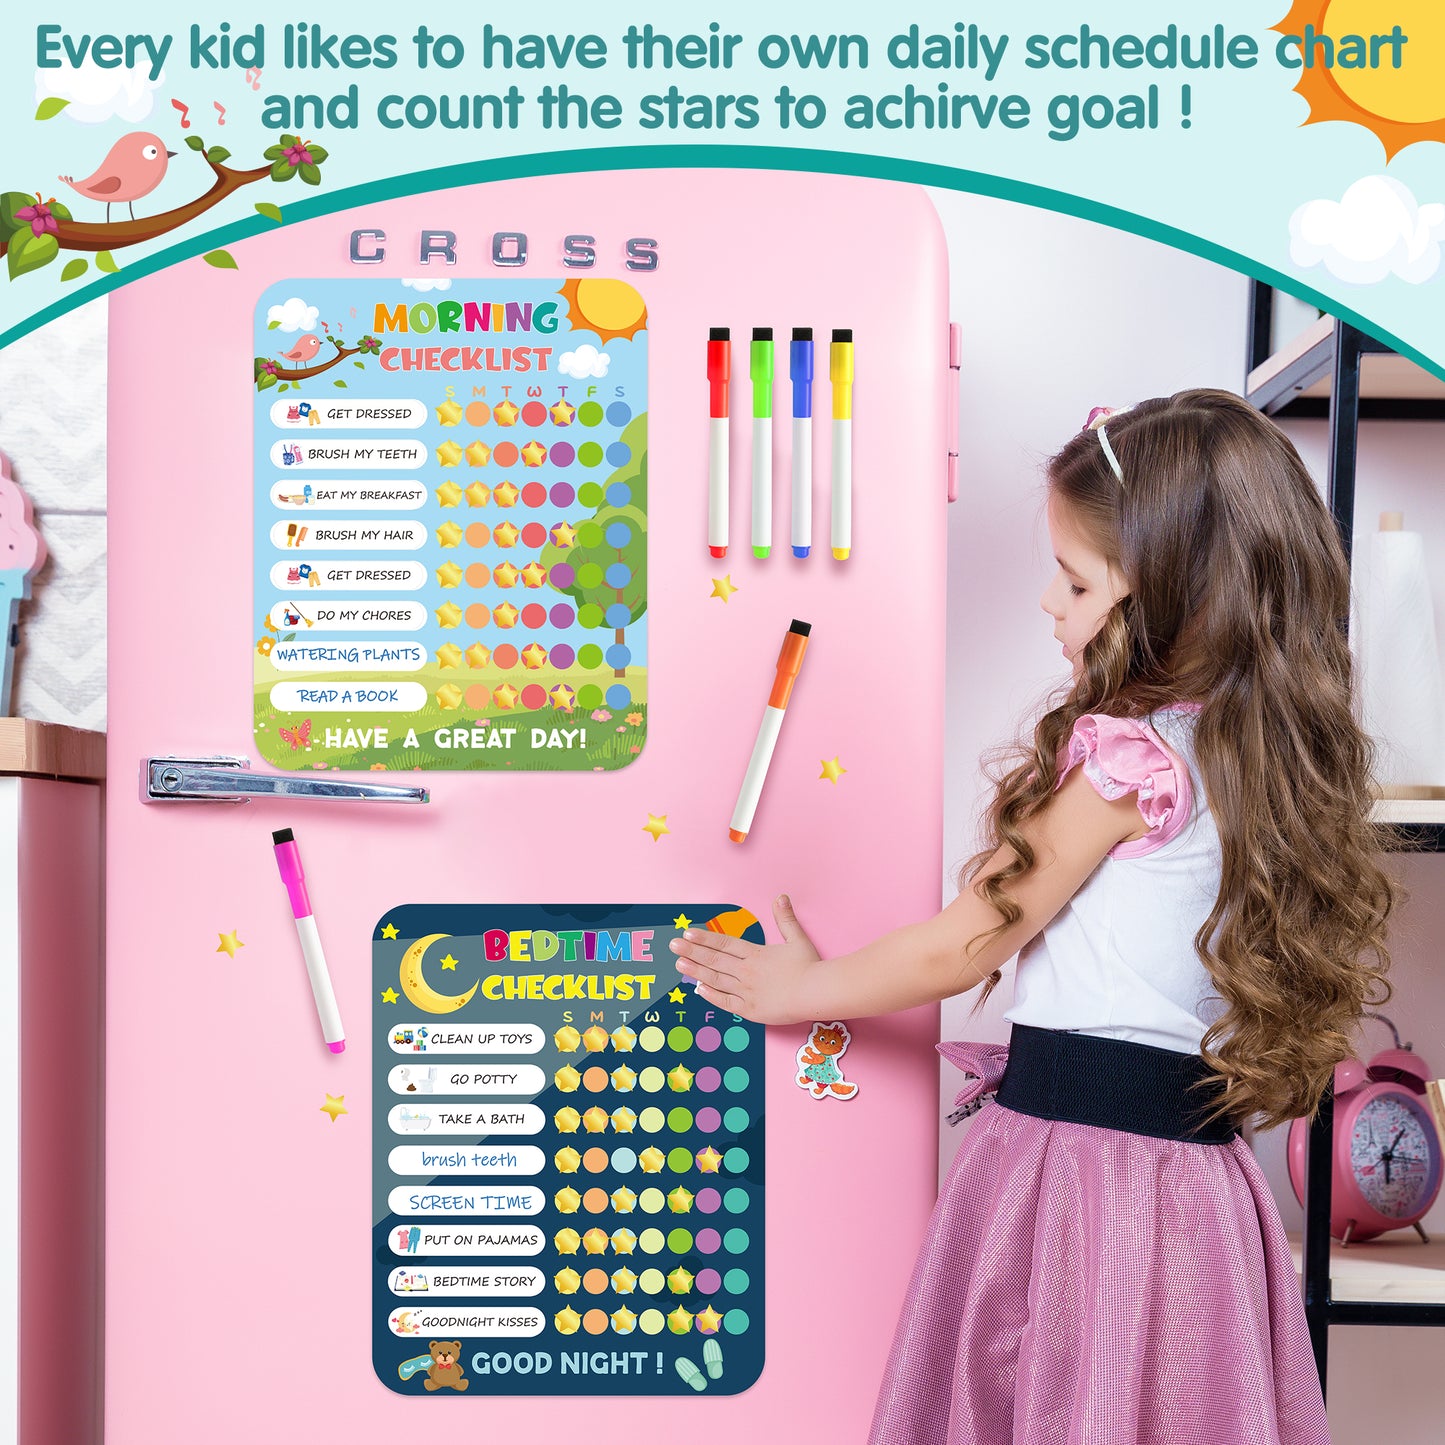 COcnny 154pcs Daily Schedule for Kids, Magnetic Schedule Board, Home Visual Daily Routine Chart, Morning Bedtime Behavior Checklist, Responsibility Reward Chore Charts Task Planning for Toddlers